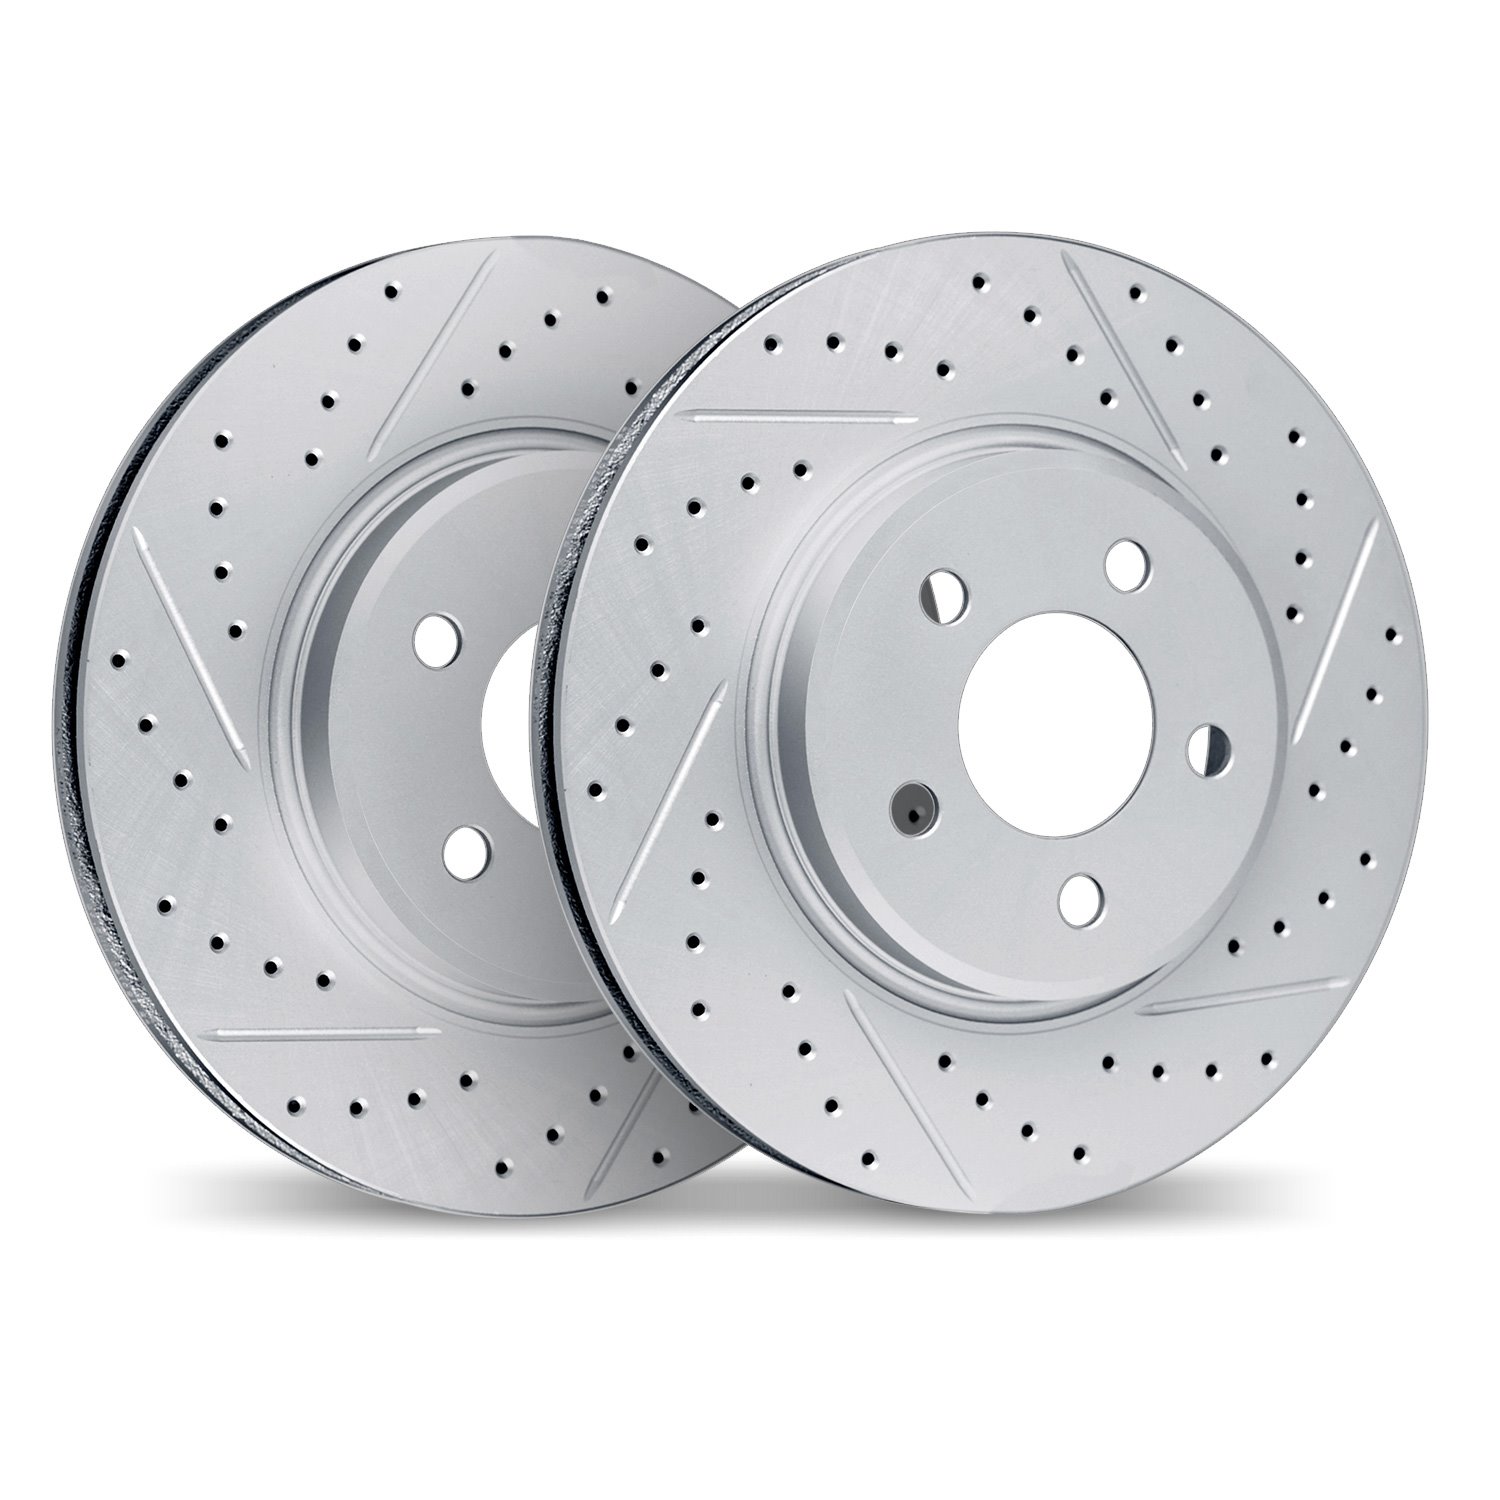 2002-54052 Geoperformance Drilled/Slotted Brake Rotors, 2000-2004 Ford/Lincoln/Mercury/Mazda, Position: Front